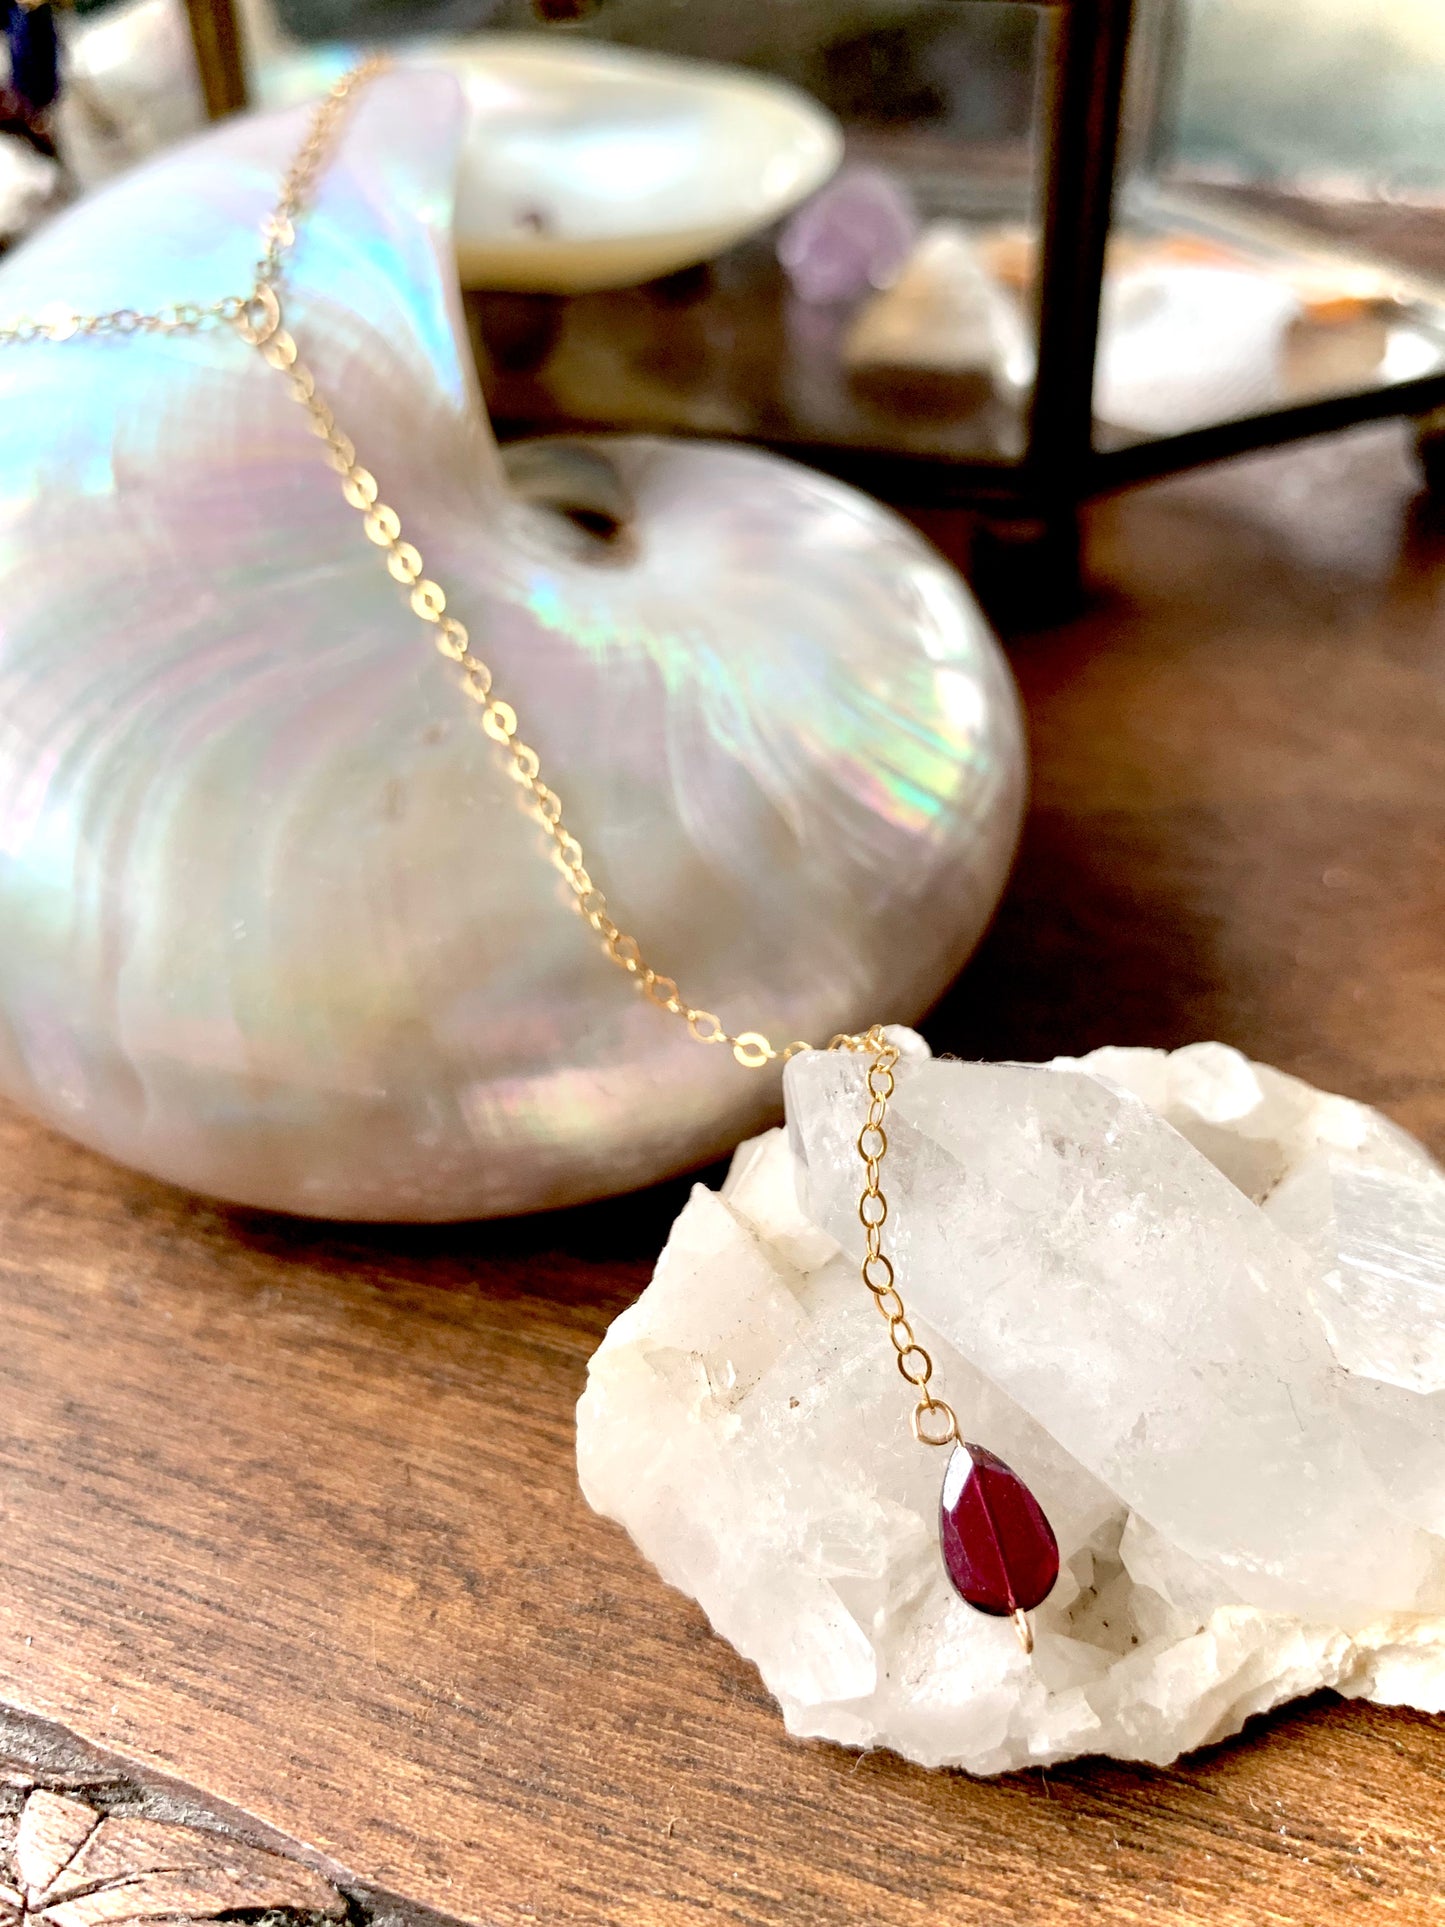 Bella drop necklace, garnet necklace, garnet on necklace close-up on crystal and shell